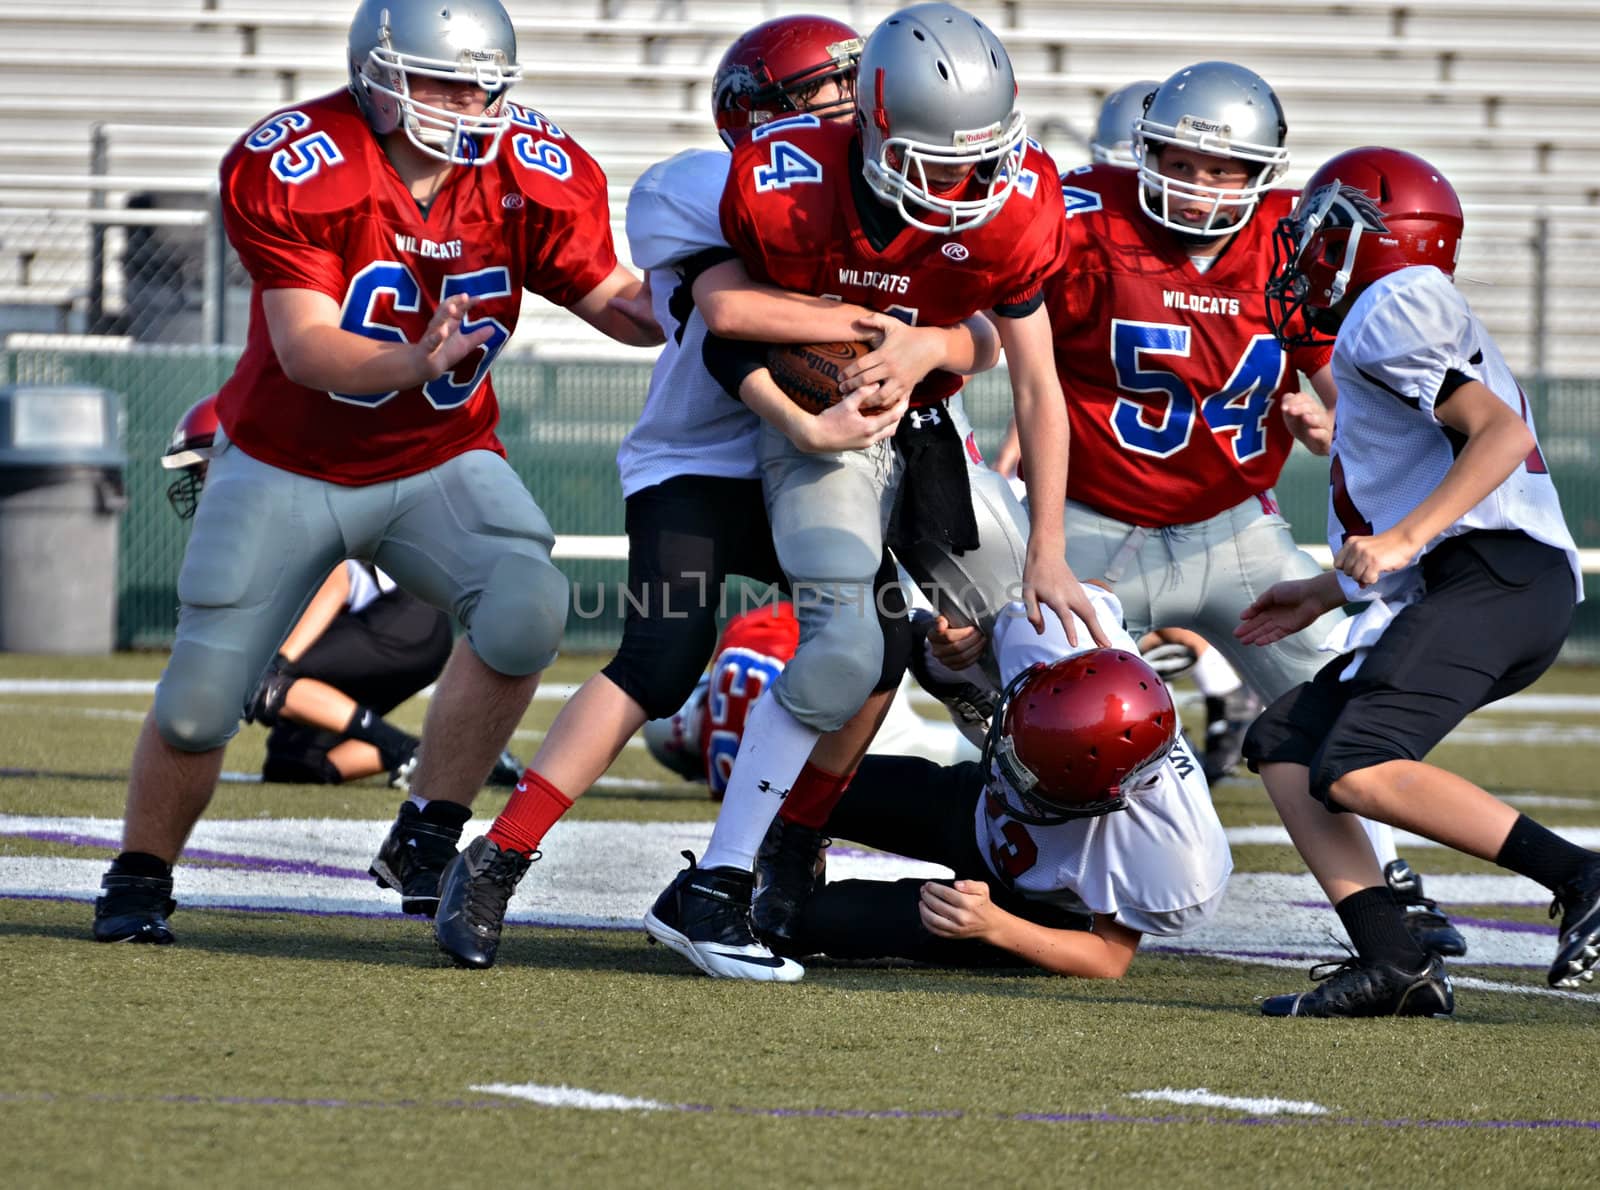 CUMMING, GA/USA - SEPTEMBER 8: Unidentified boys blocking and tackling during a football game. Two teams of 7th grade boys September 8, 2012 in Cumming GA. The Wildcats  vs The Mustangs.